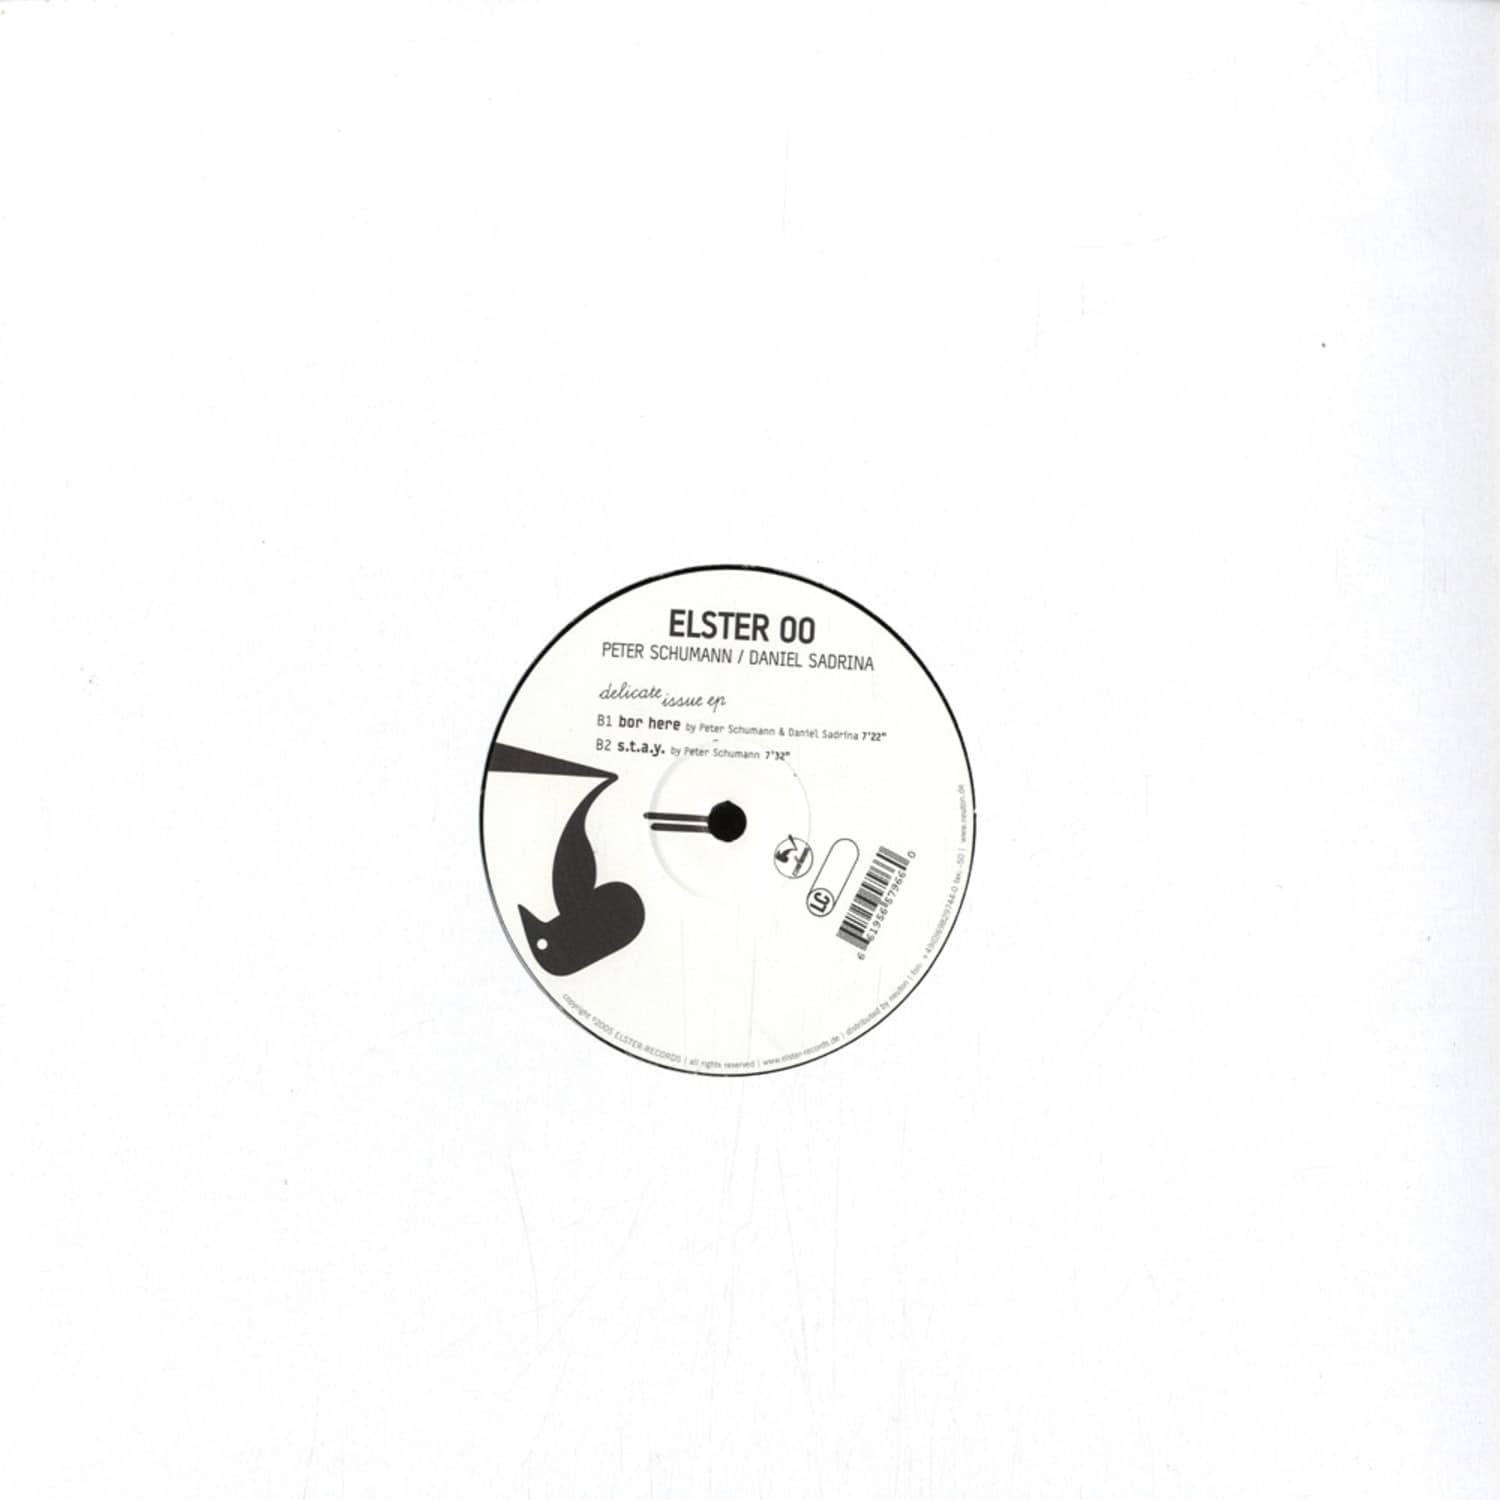 Peter Schumann - DELICATE ISSUE EP